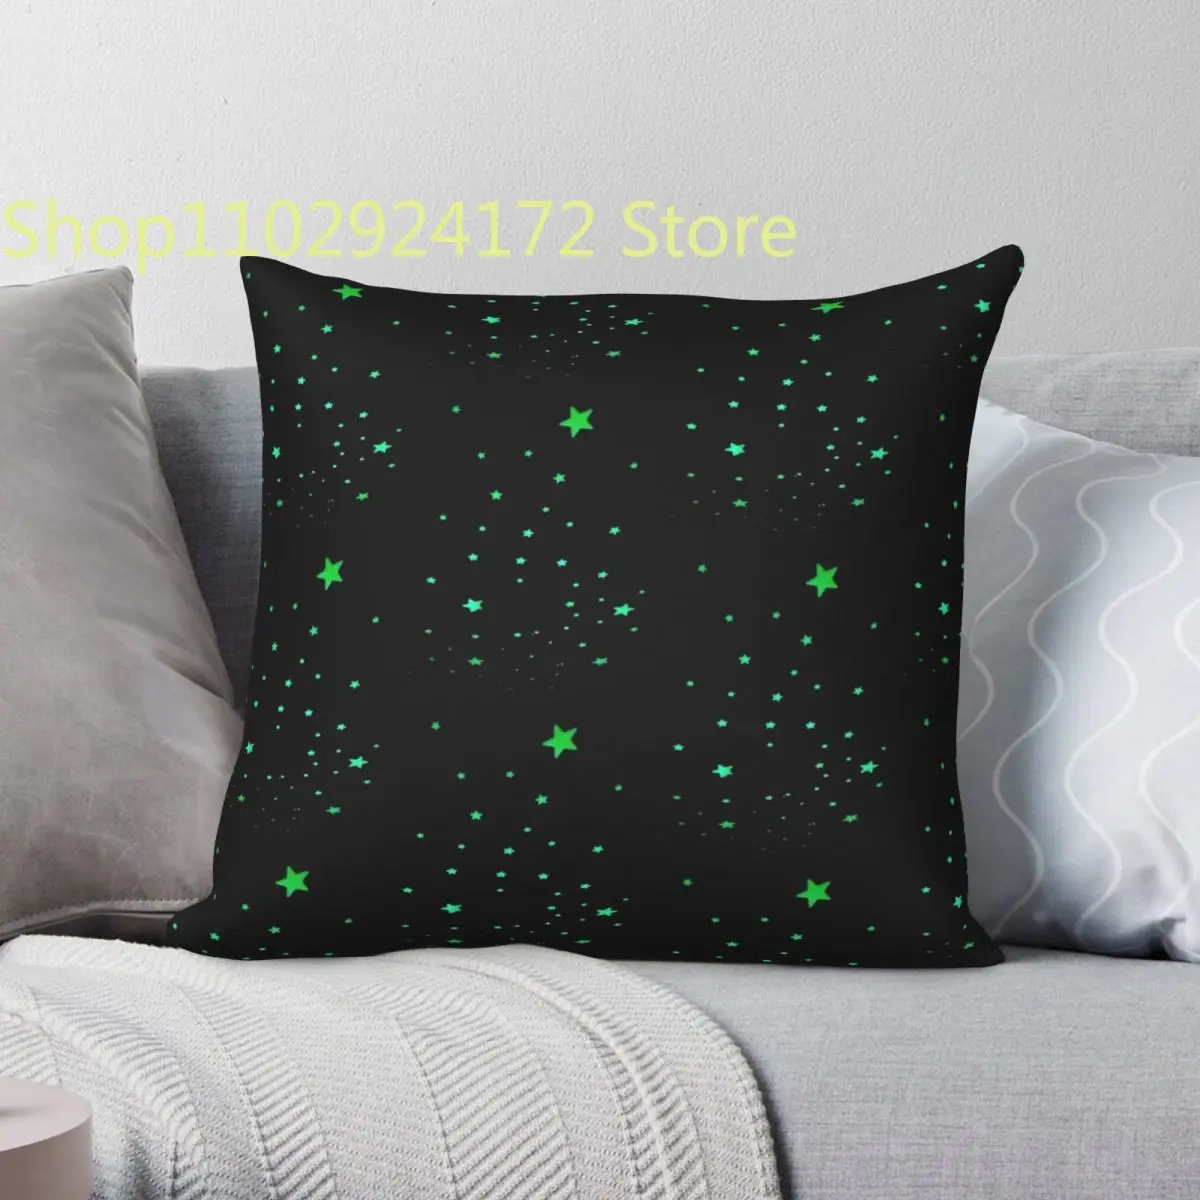 

Glow In The Dark Star Aesthetic Square Pillowcase Polyester Printed Zip Decor Pillow Case Home Cushion Case 45x45